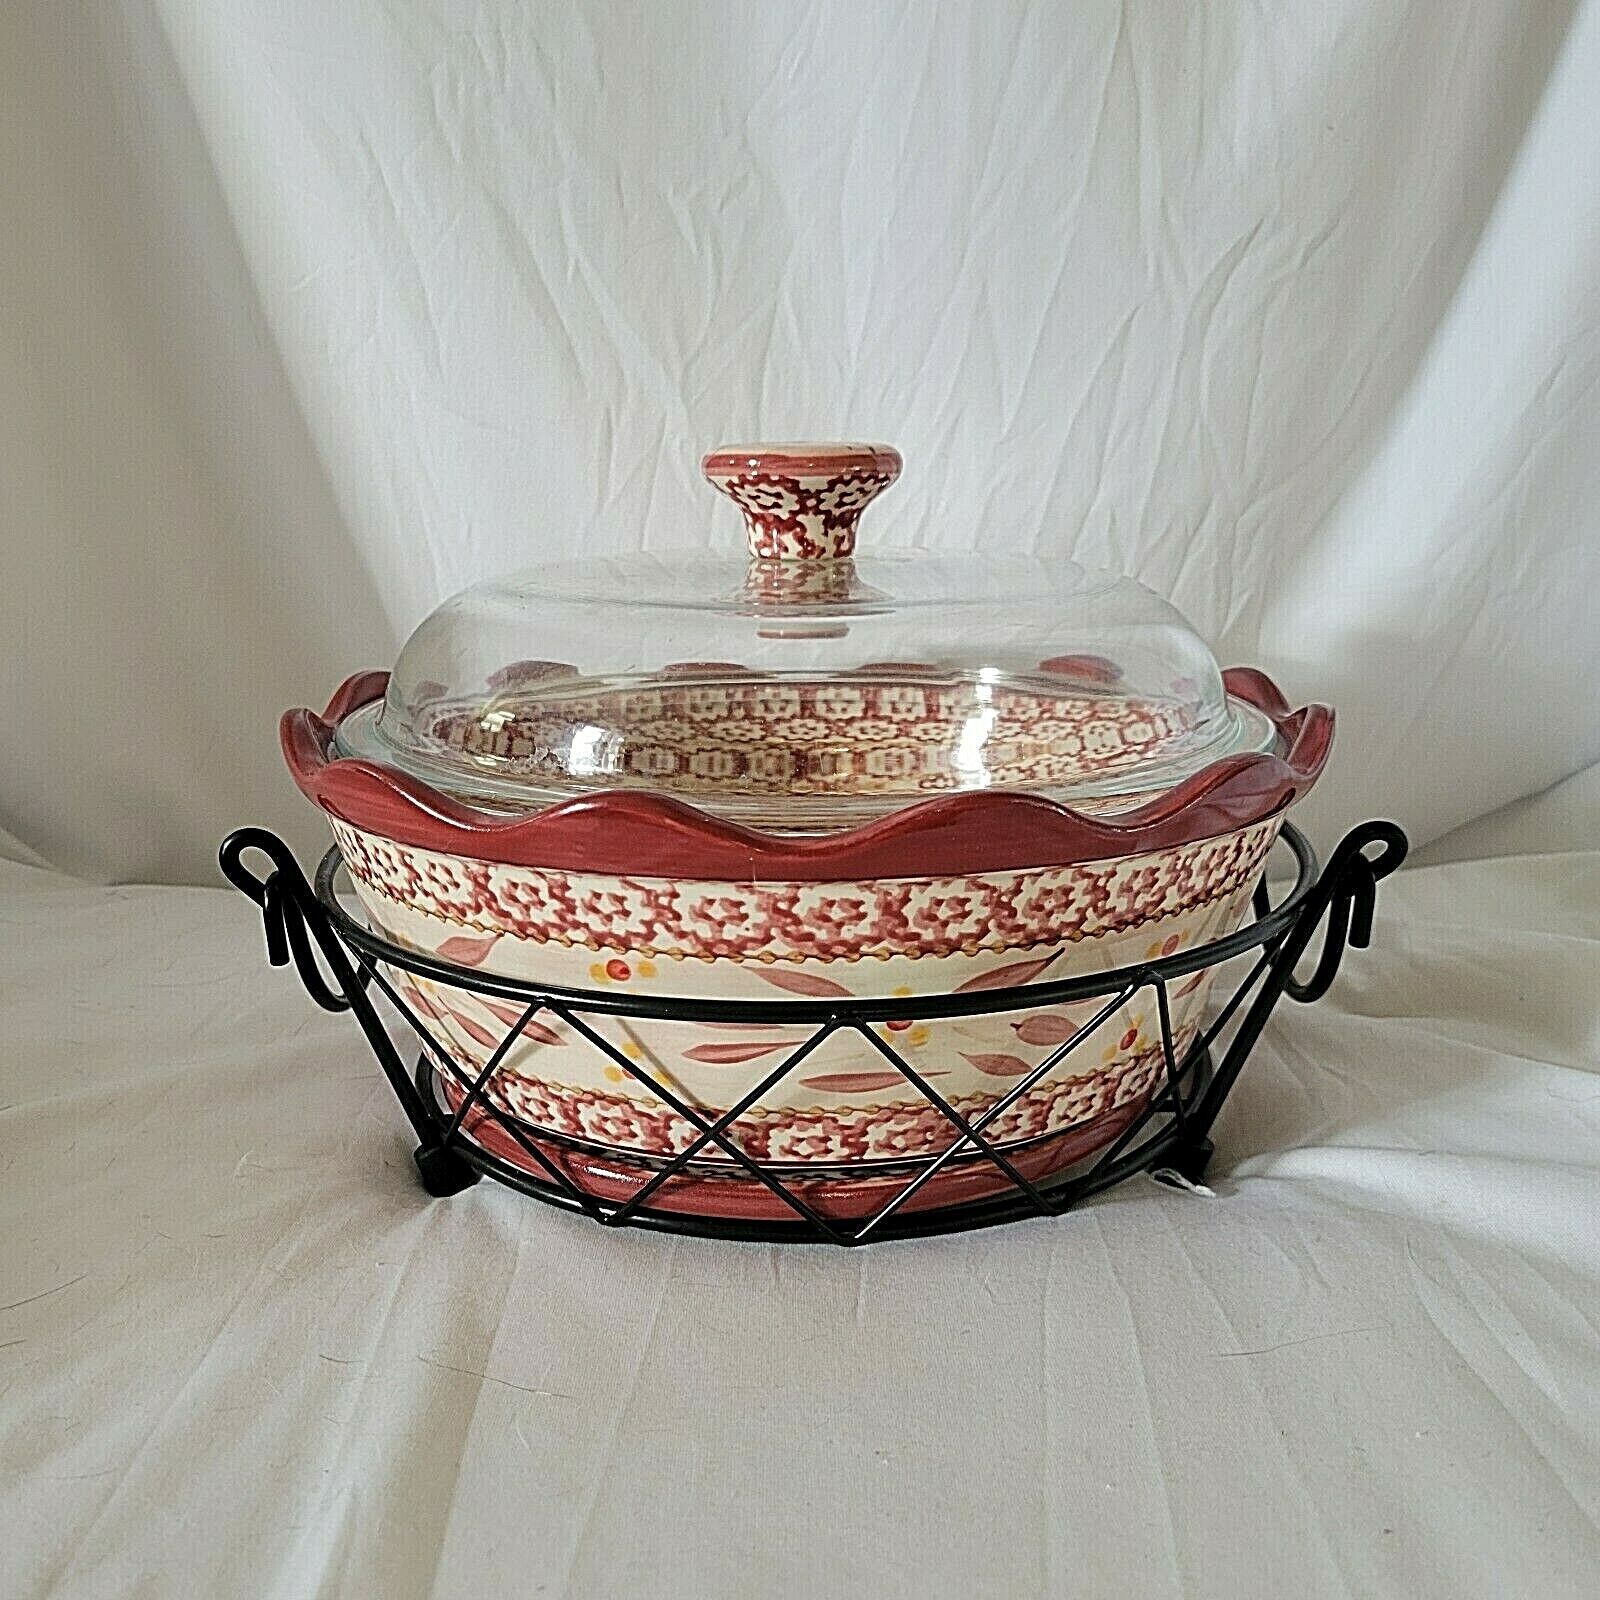 Temptations Old Max 40% OFF World Cranberry Covered Dish 1.5 Qt Special Campaign Wi Casserole